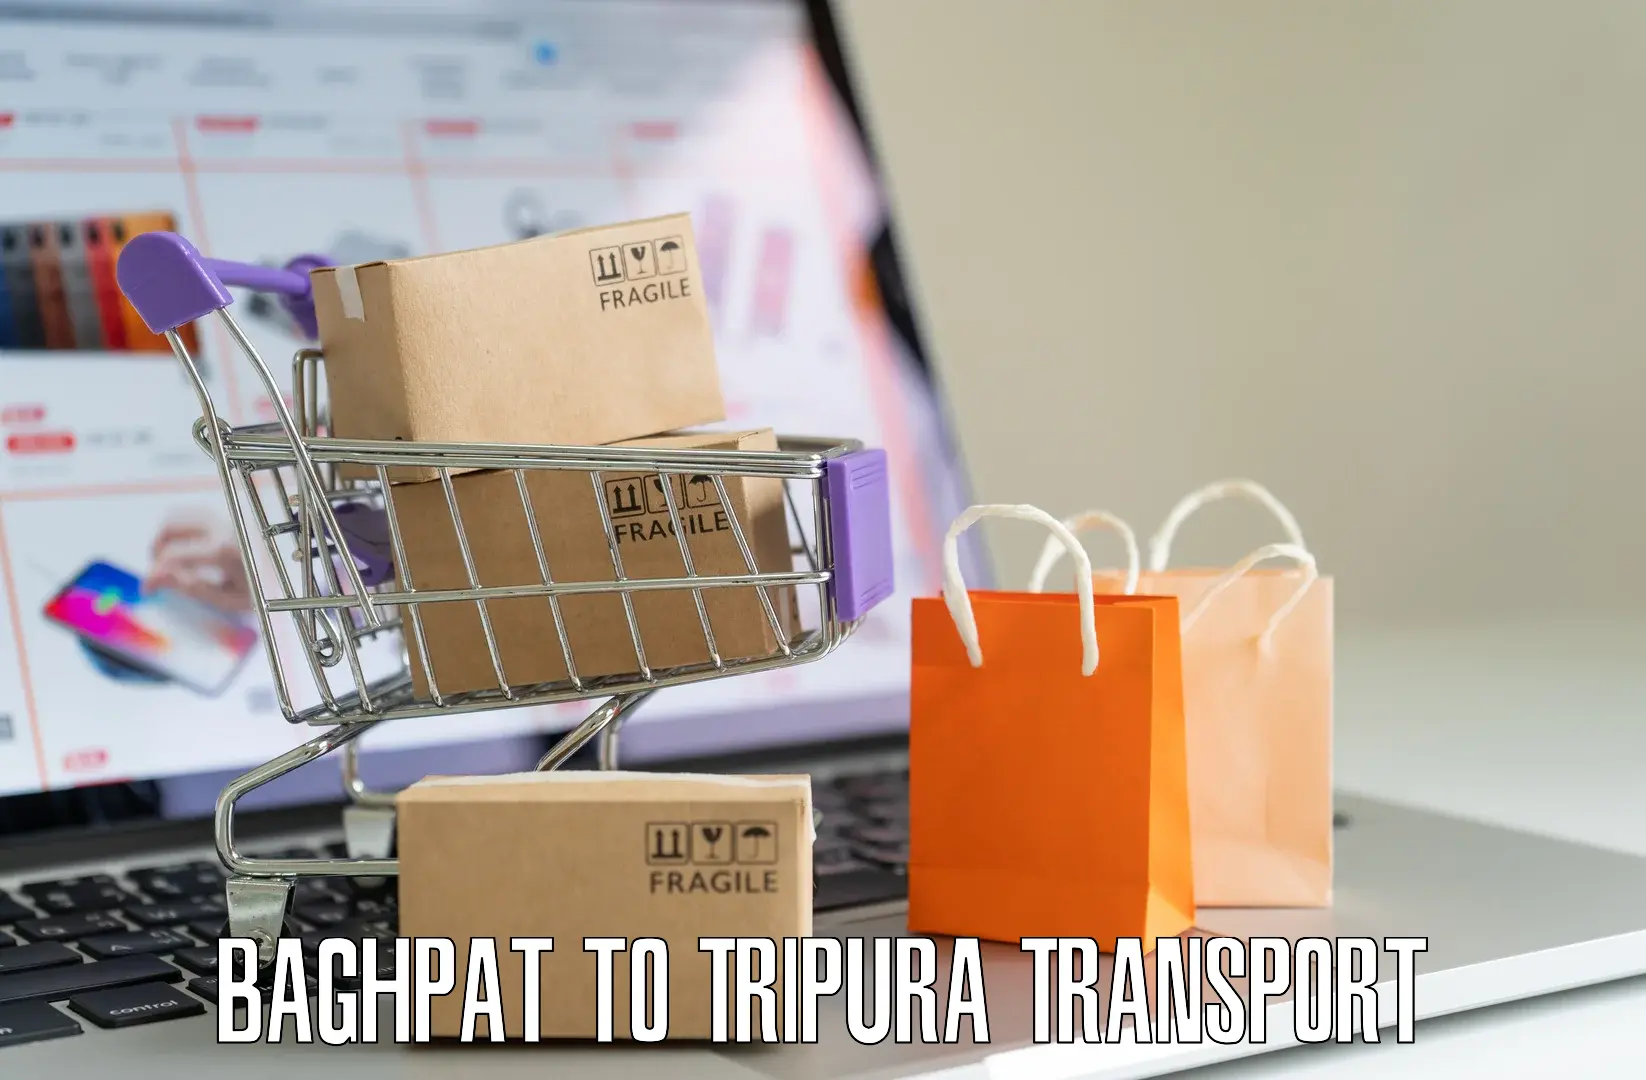 Nearby transport service Baghpat to Tripura